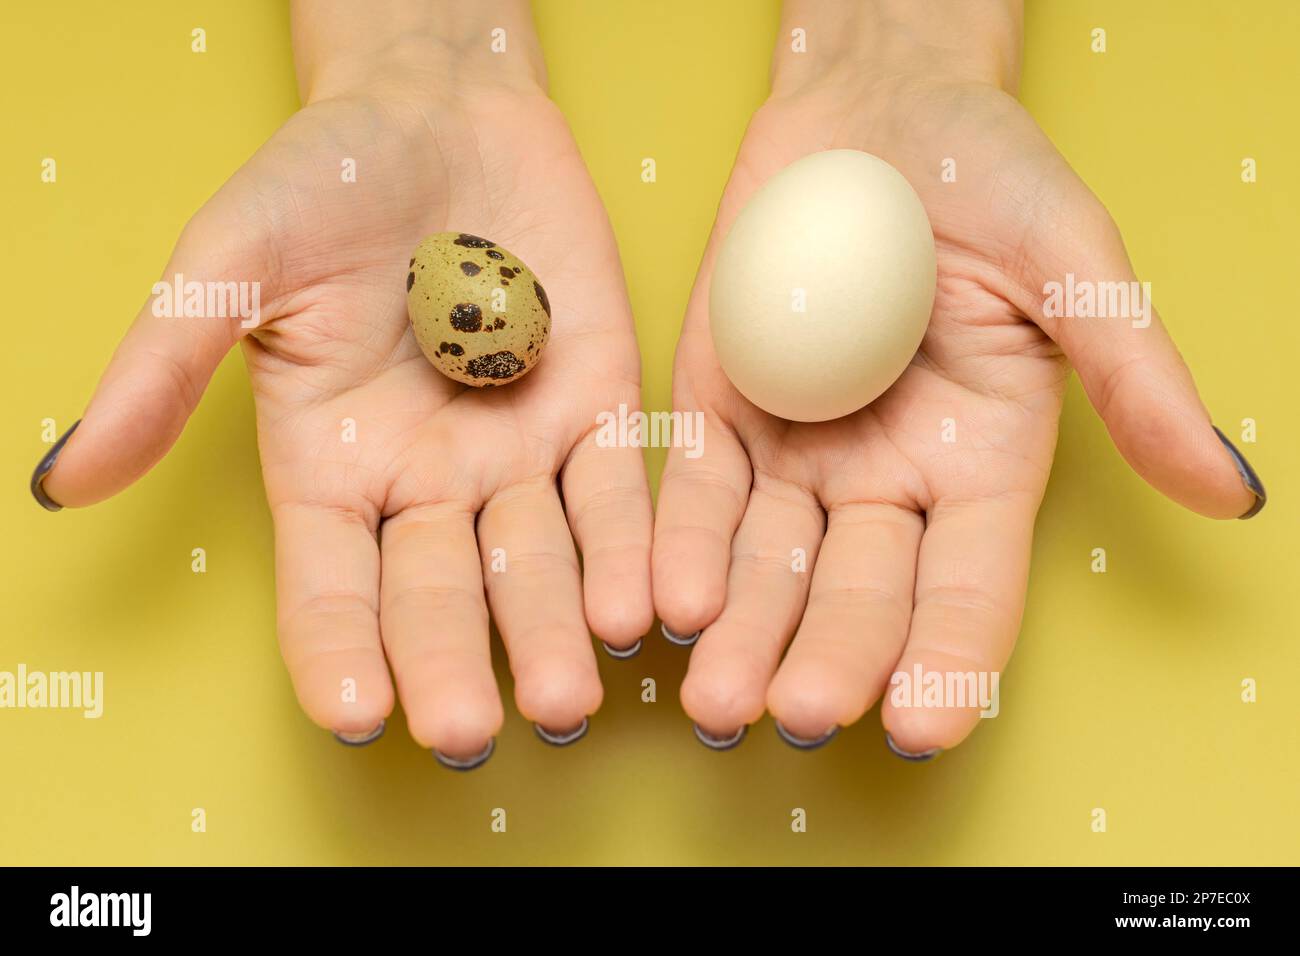 chicken egg lies in the palm of a person. man holding chicken and quail egg in hand. man comparing two bird eggs. Stock Photo